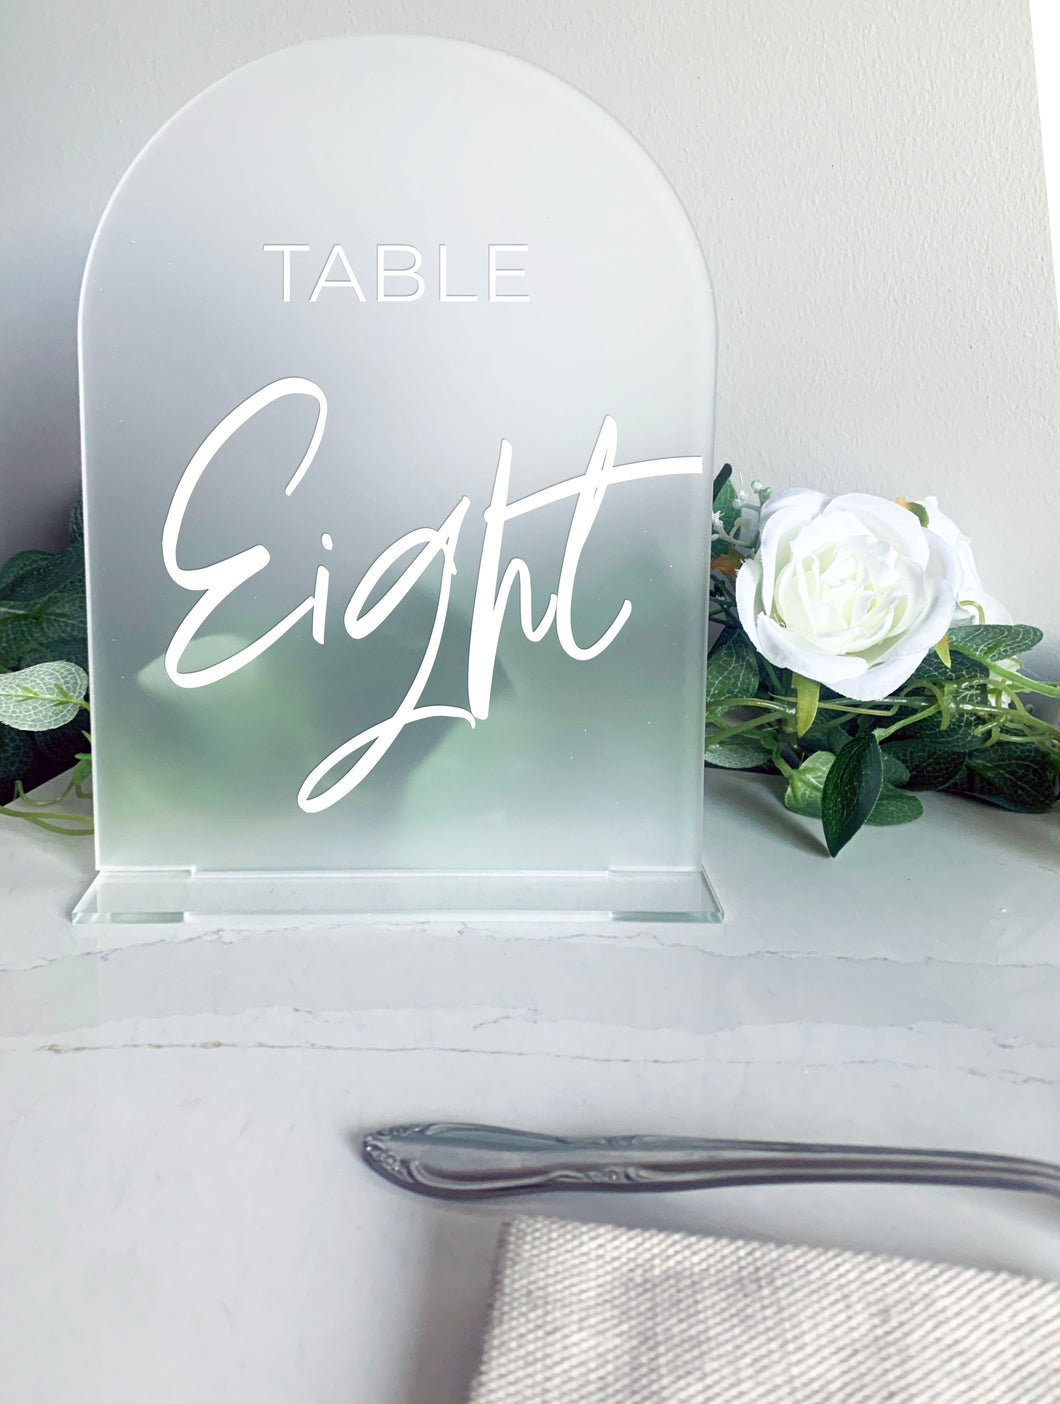 Freestanding Arched Acrylic Table Number Signs for Wedding